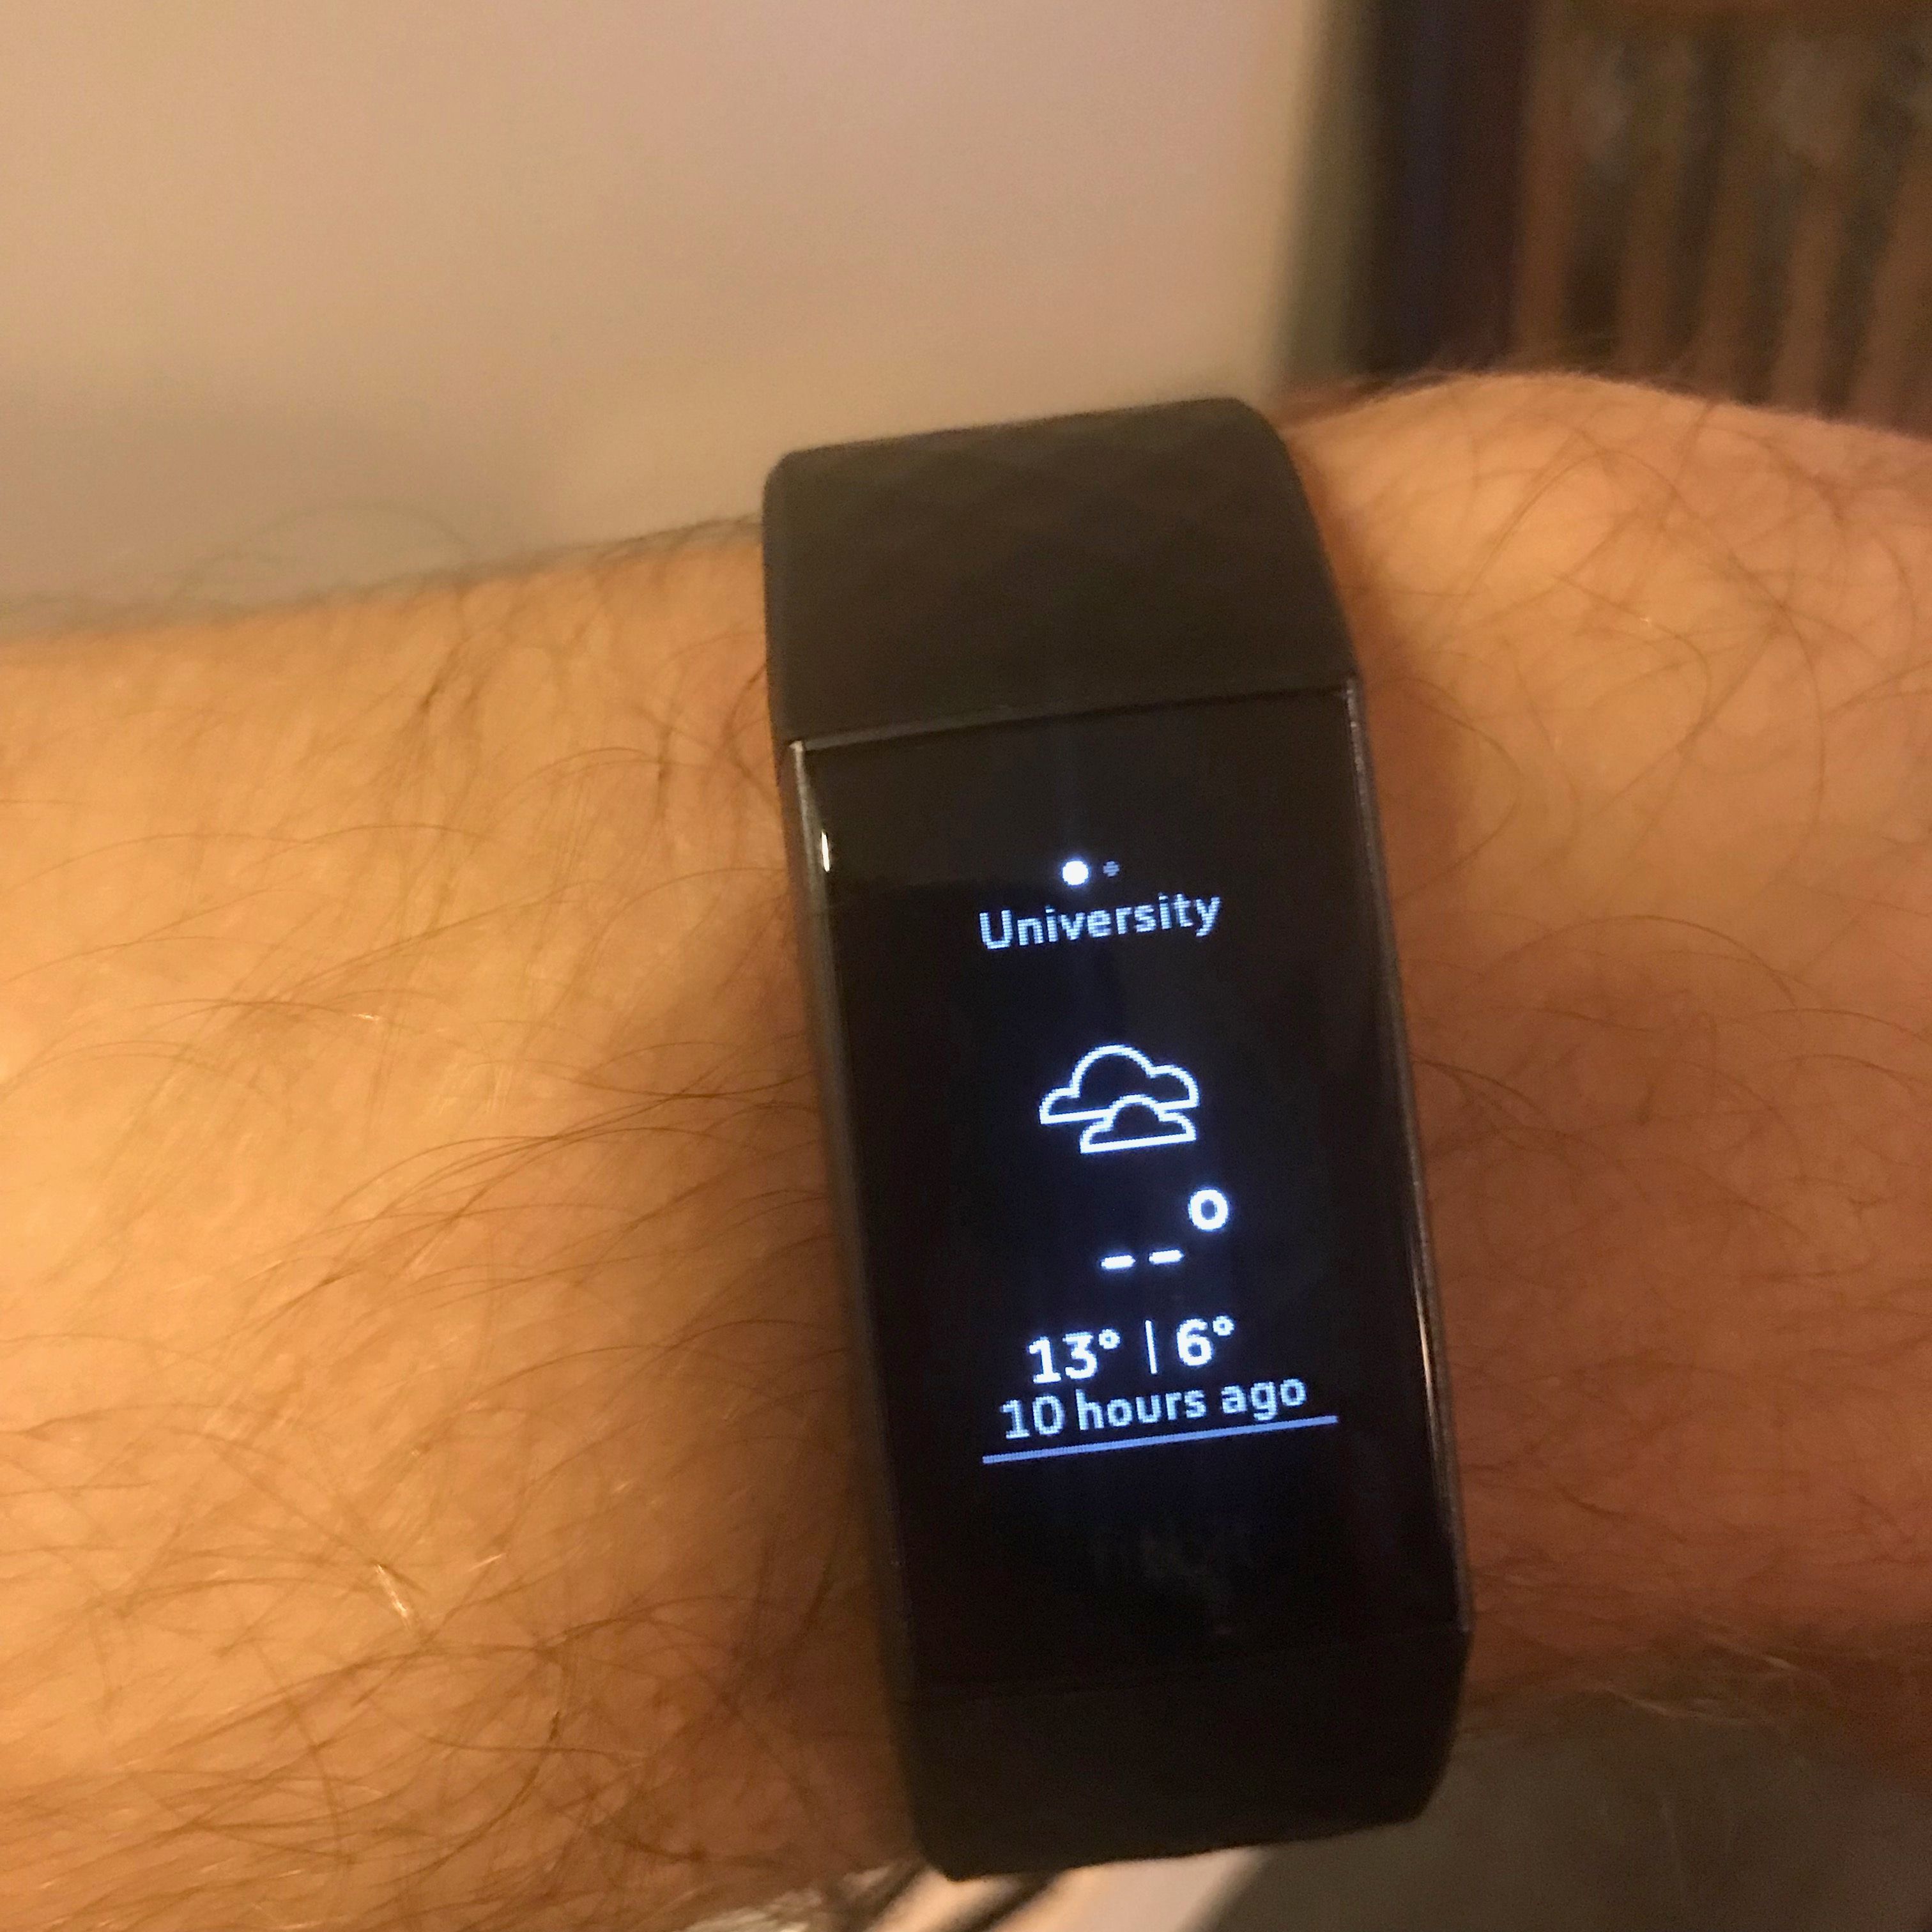 sync fitbit charge 3 with iphone